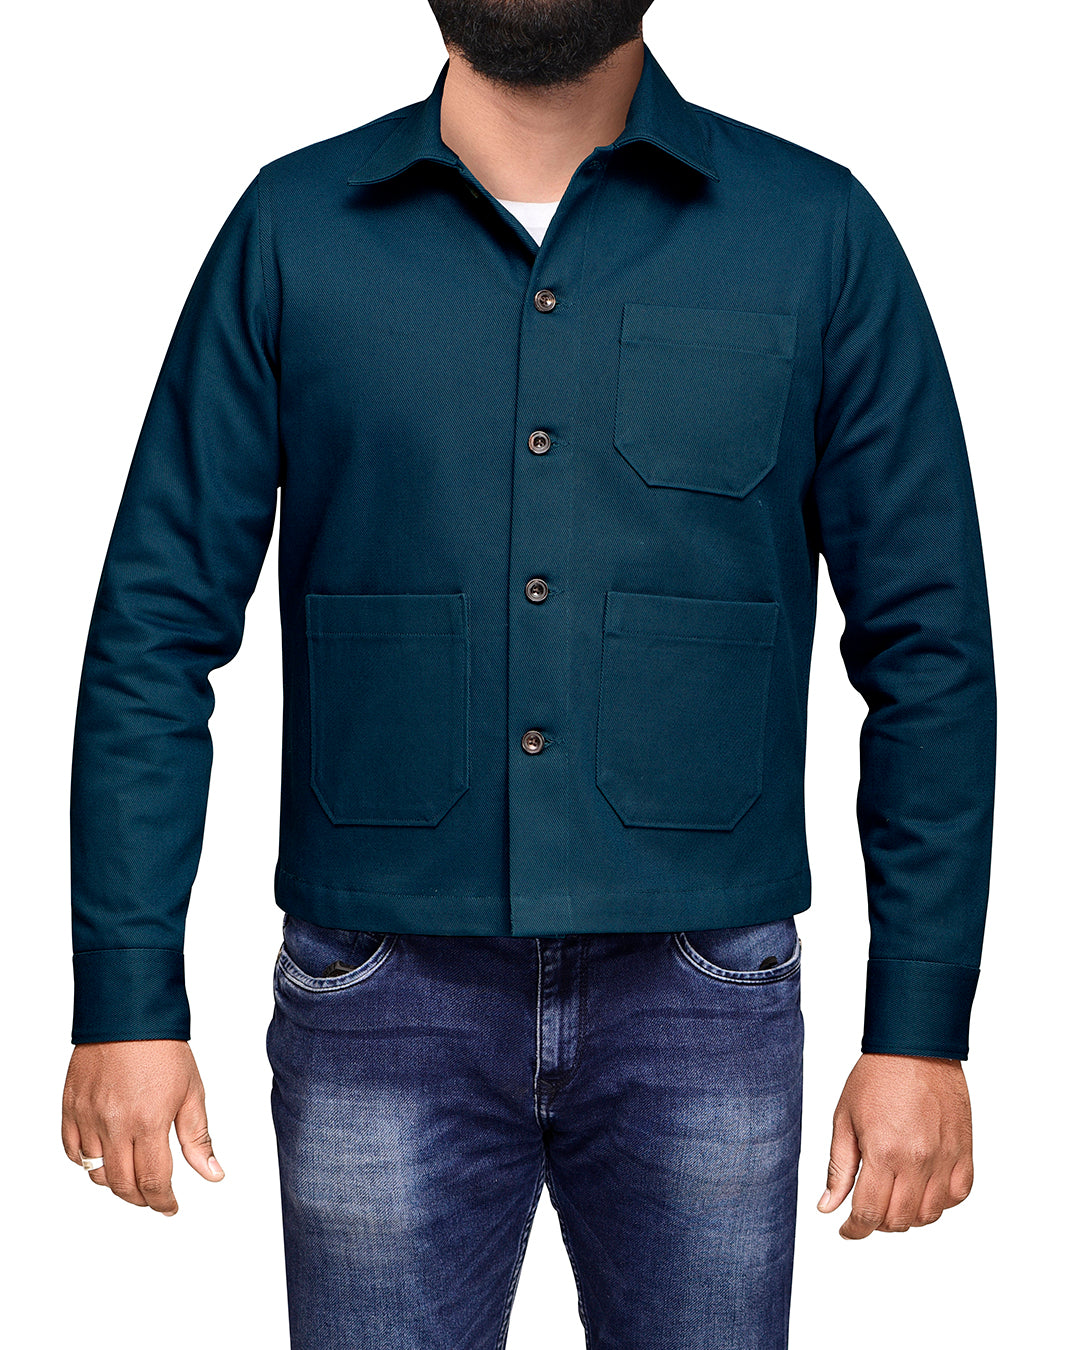 Front of model wearing the twill shirt jacket for men by Luxire in dark teal